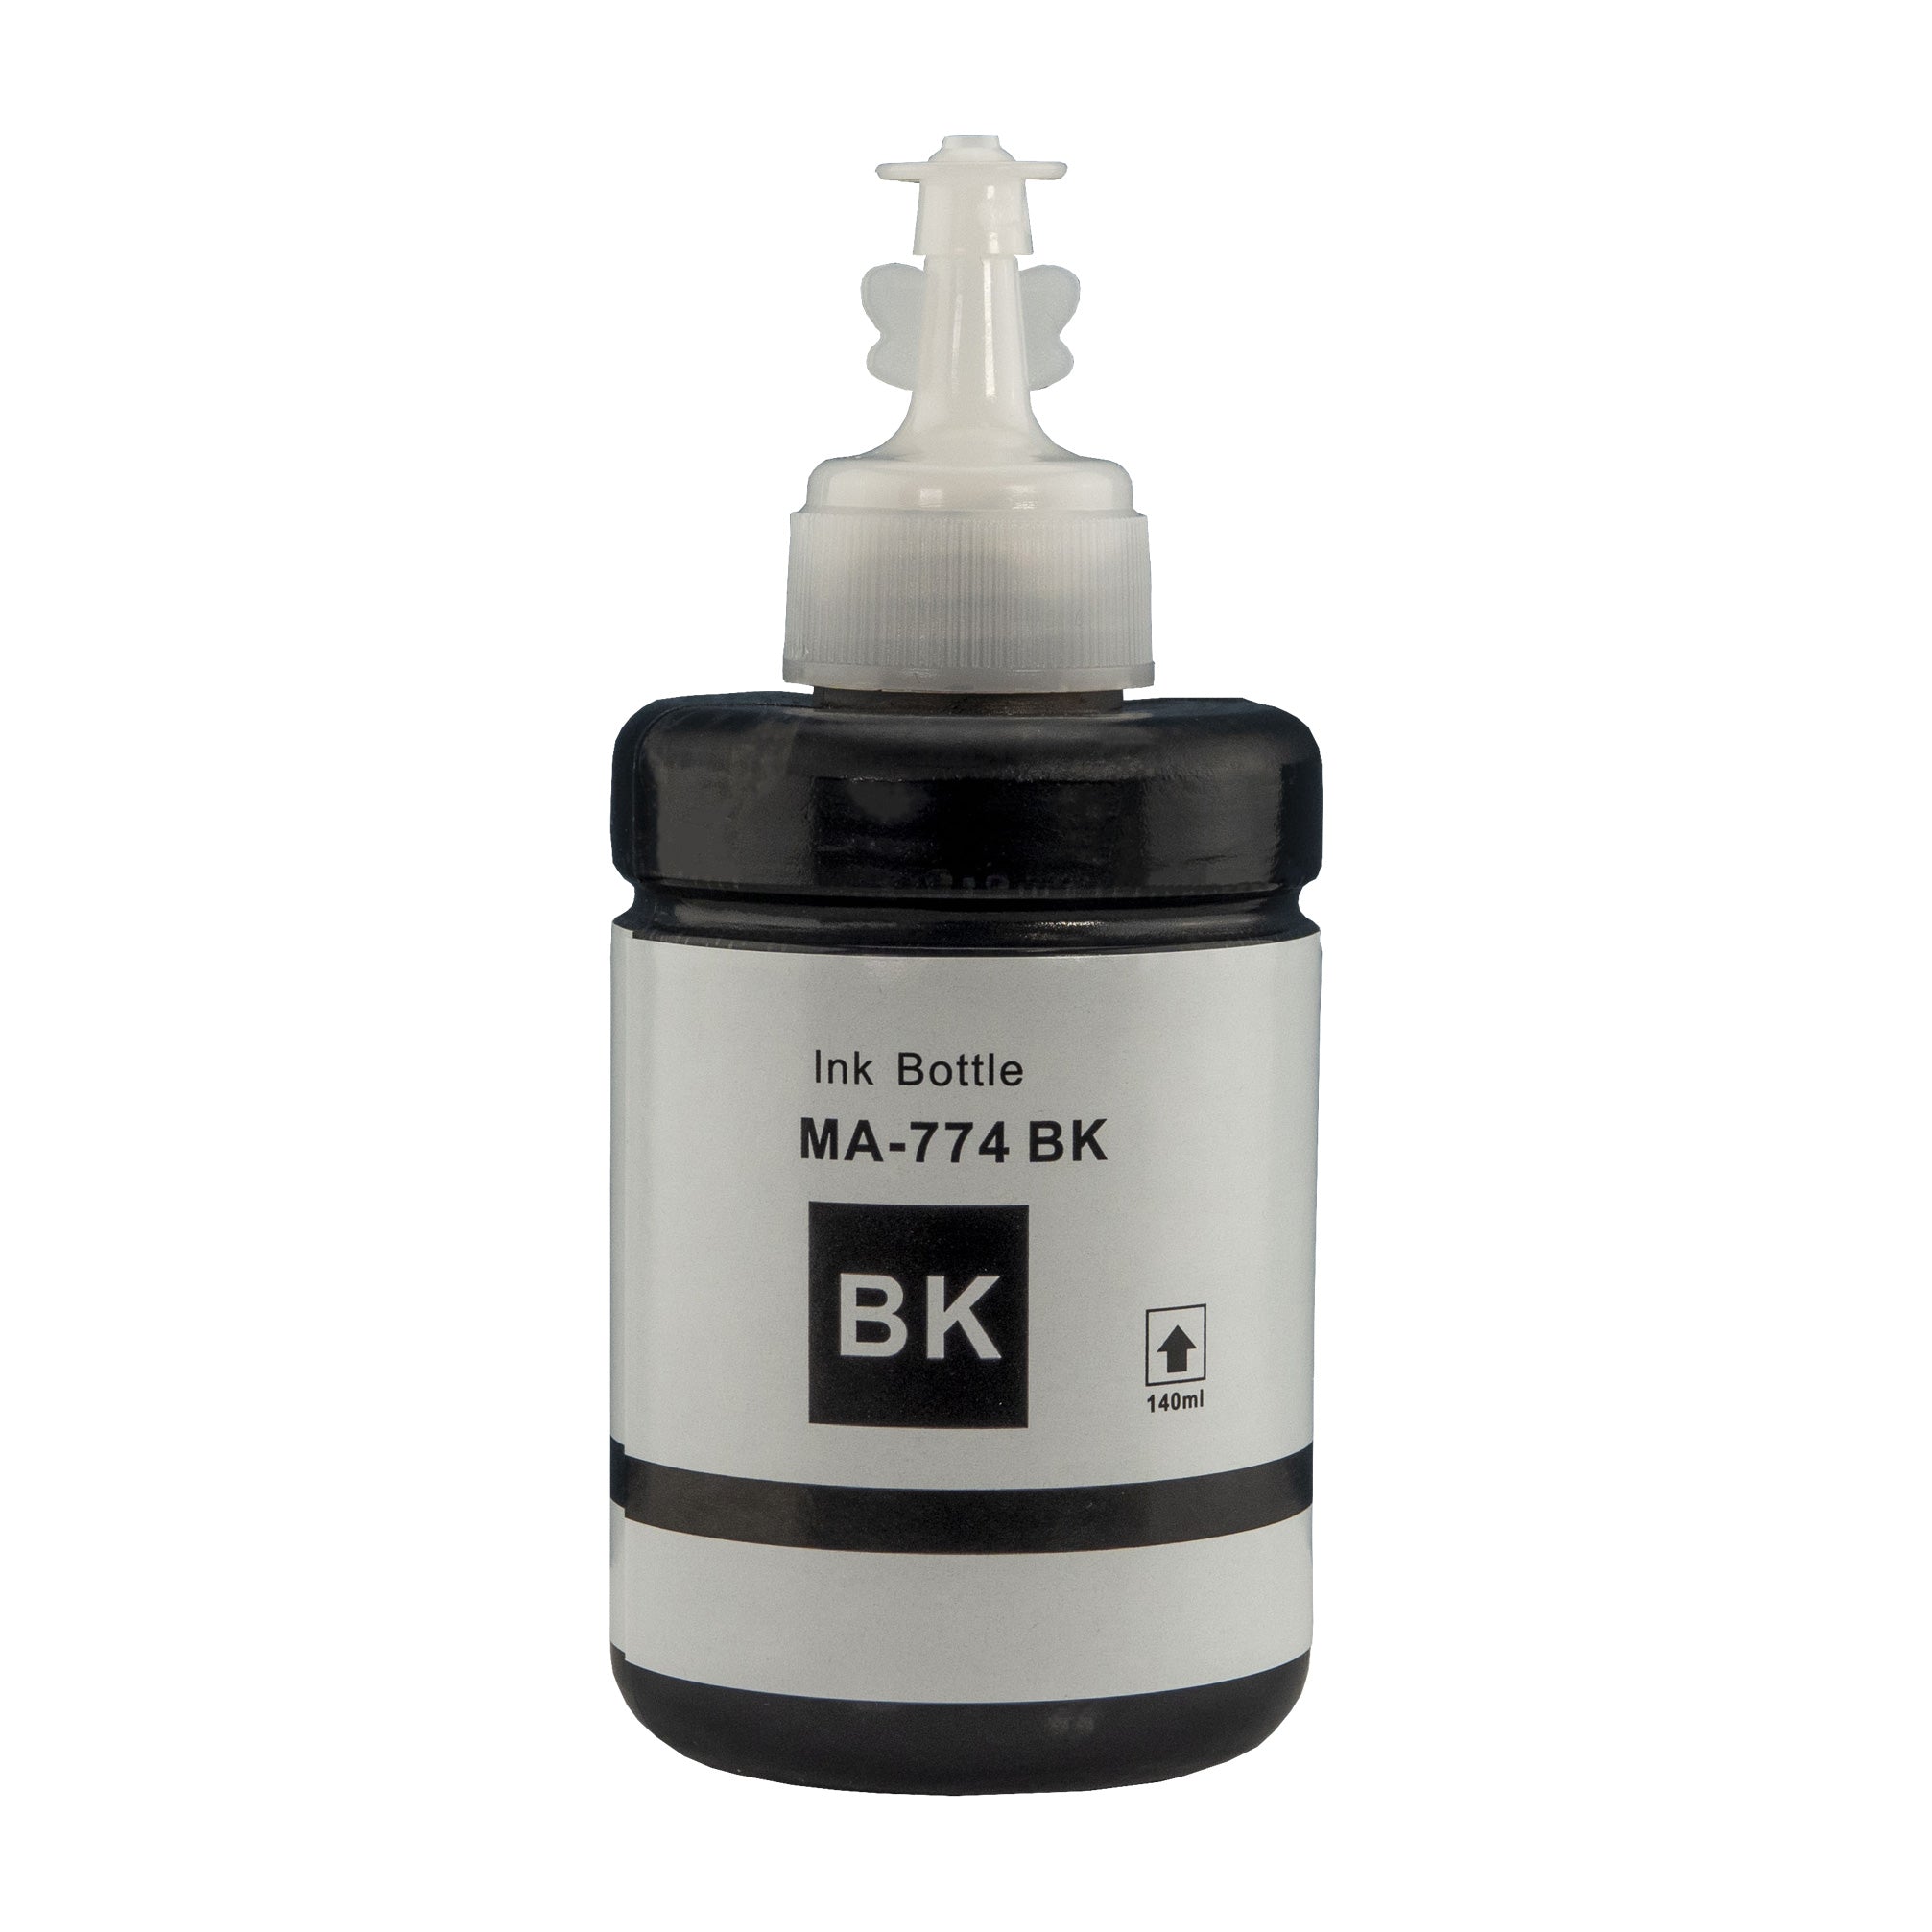 Refill Ink Compatible for Epson 774 ECO Tank Black ink Bottle